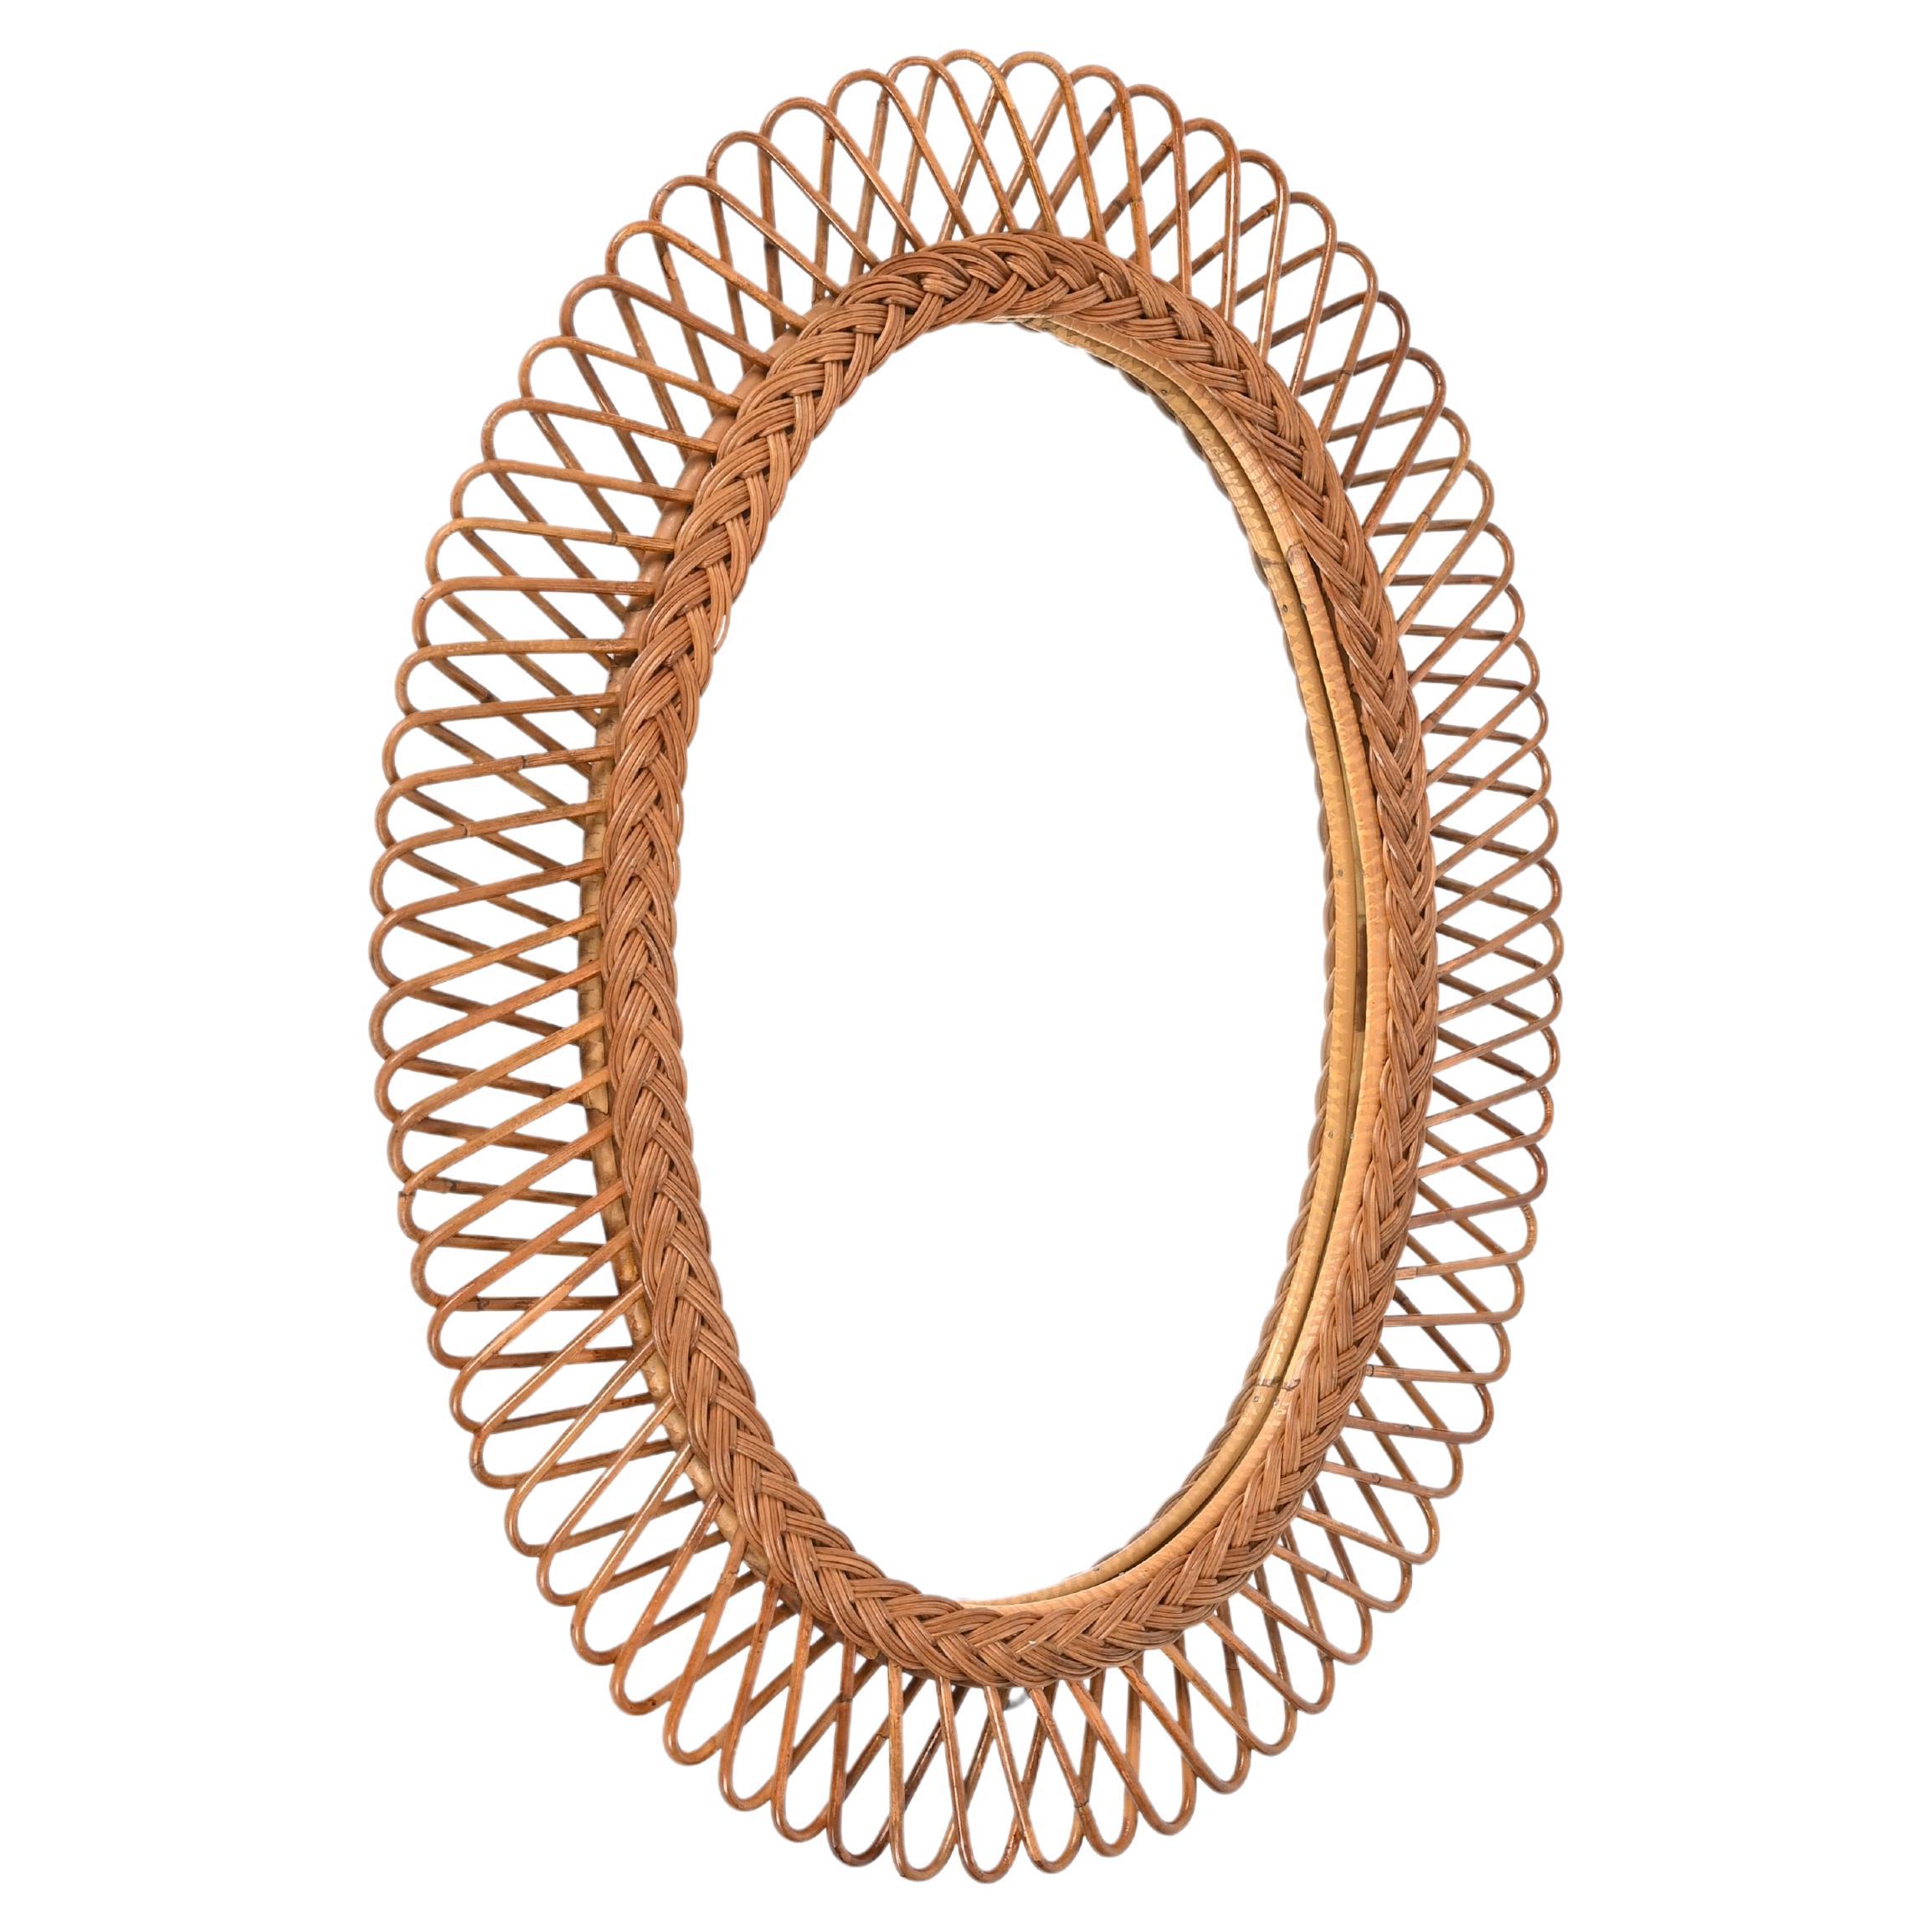 Fantastic Mid-Century French Riviera style oval mirror in curved rattan bamboo and wicker. This marvellous mirror was designed by Franco Albine in Italy during the 1970s. 

This stunning mirror has a double oval frame, enriched by gorgeous curved